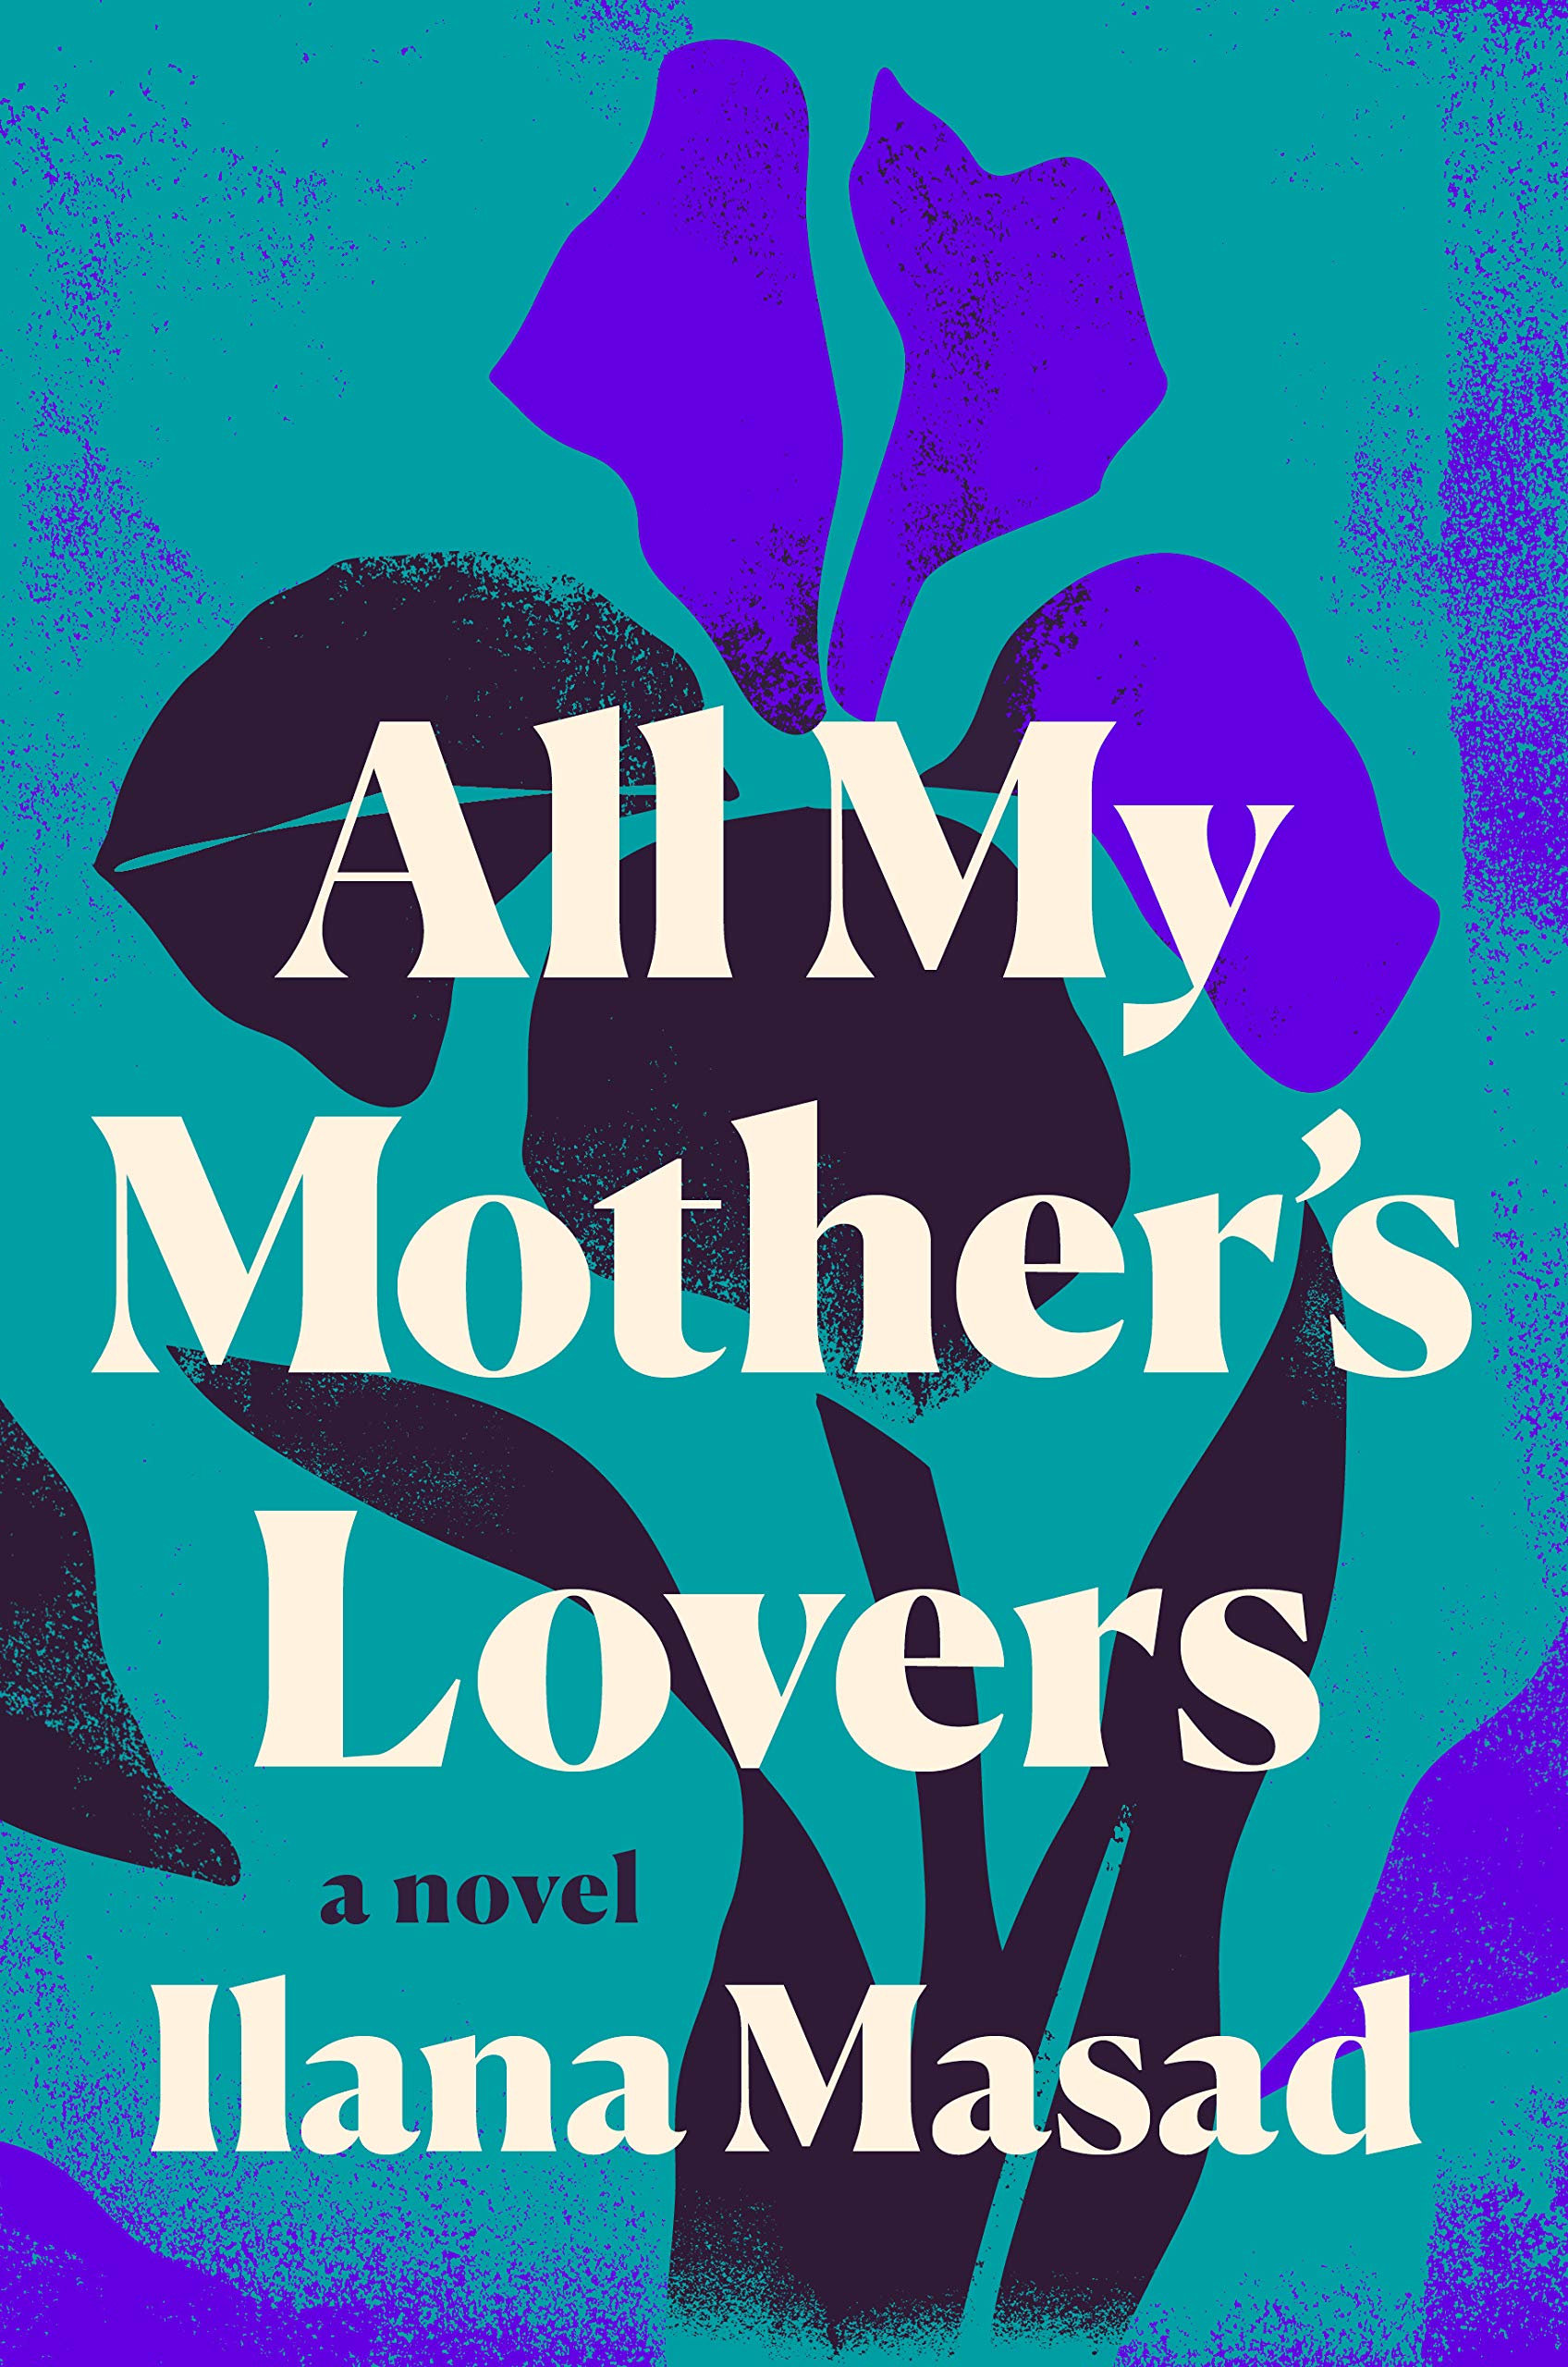 All My Mother's Lovers - A Novel